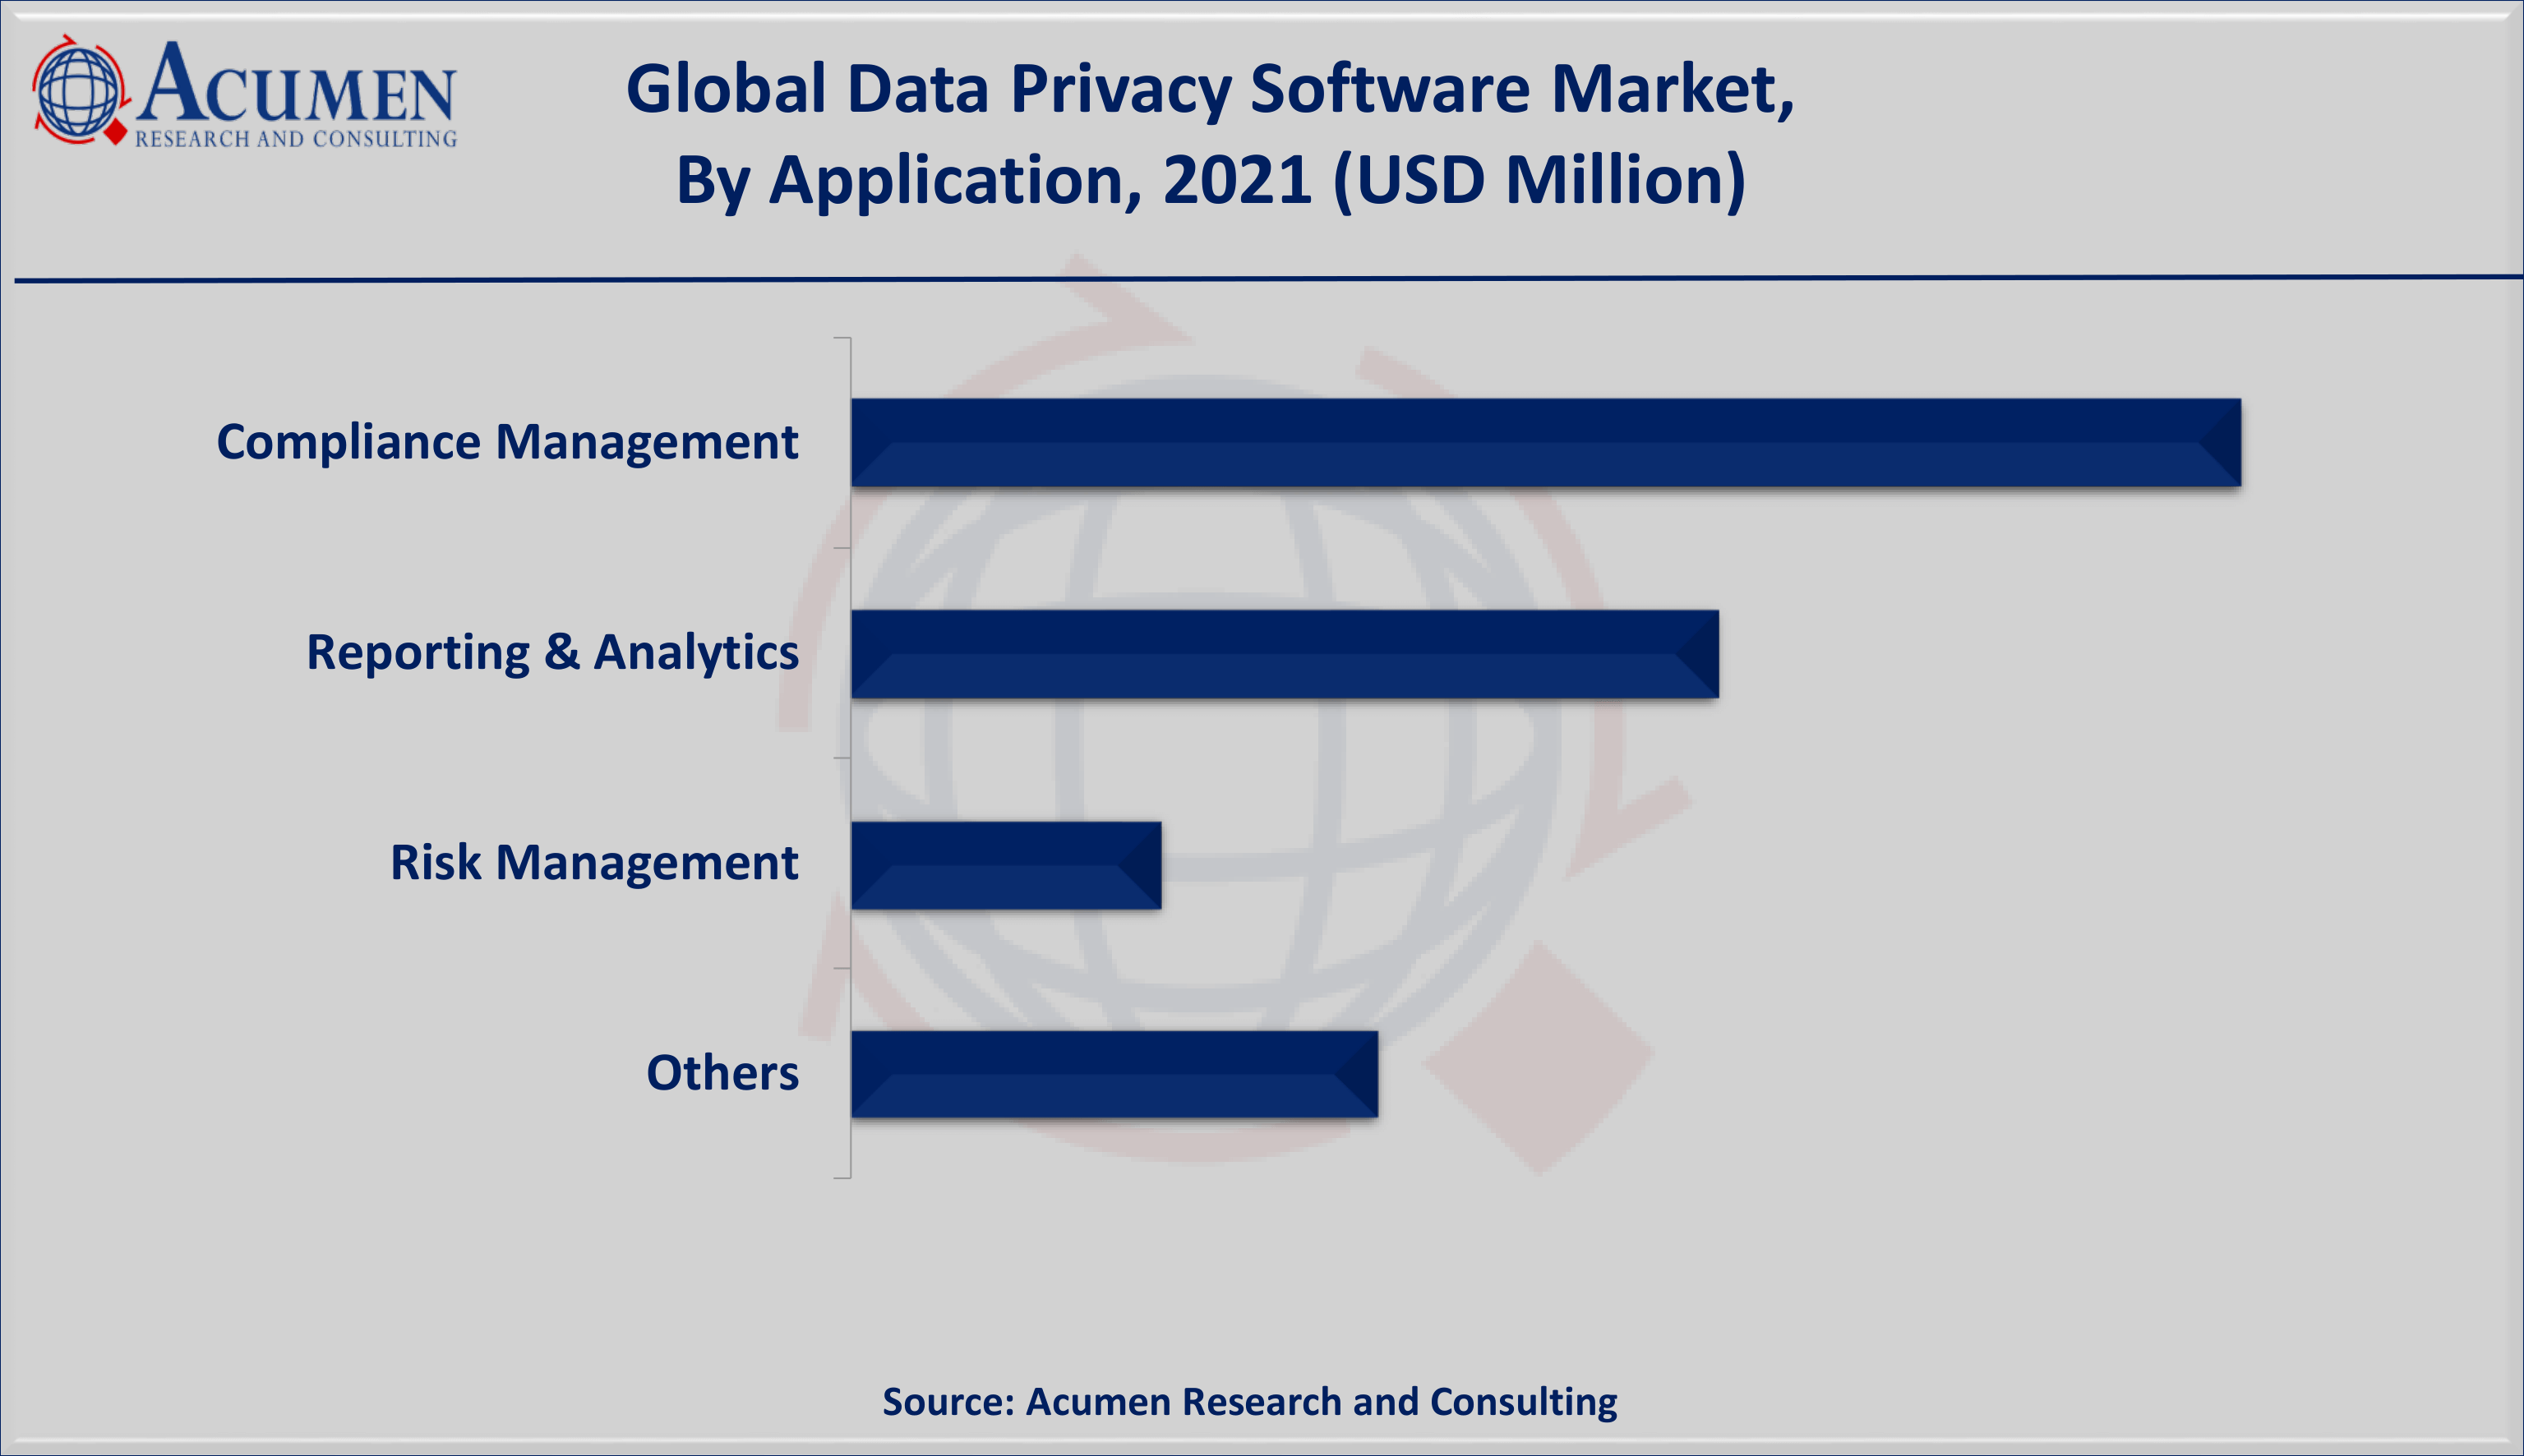 Data Privacy Software Market Size accounted for USD 1,692 Million in 2021 and is estimated to achieve a market size of USD 35,088 Million by 2030